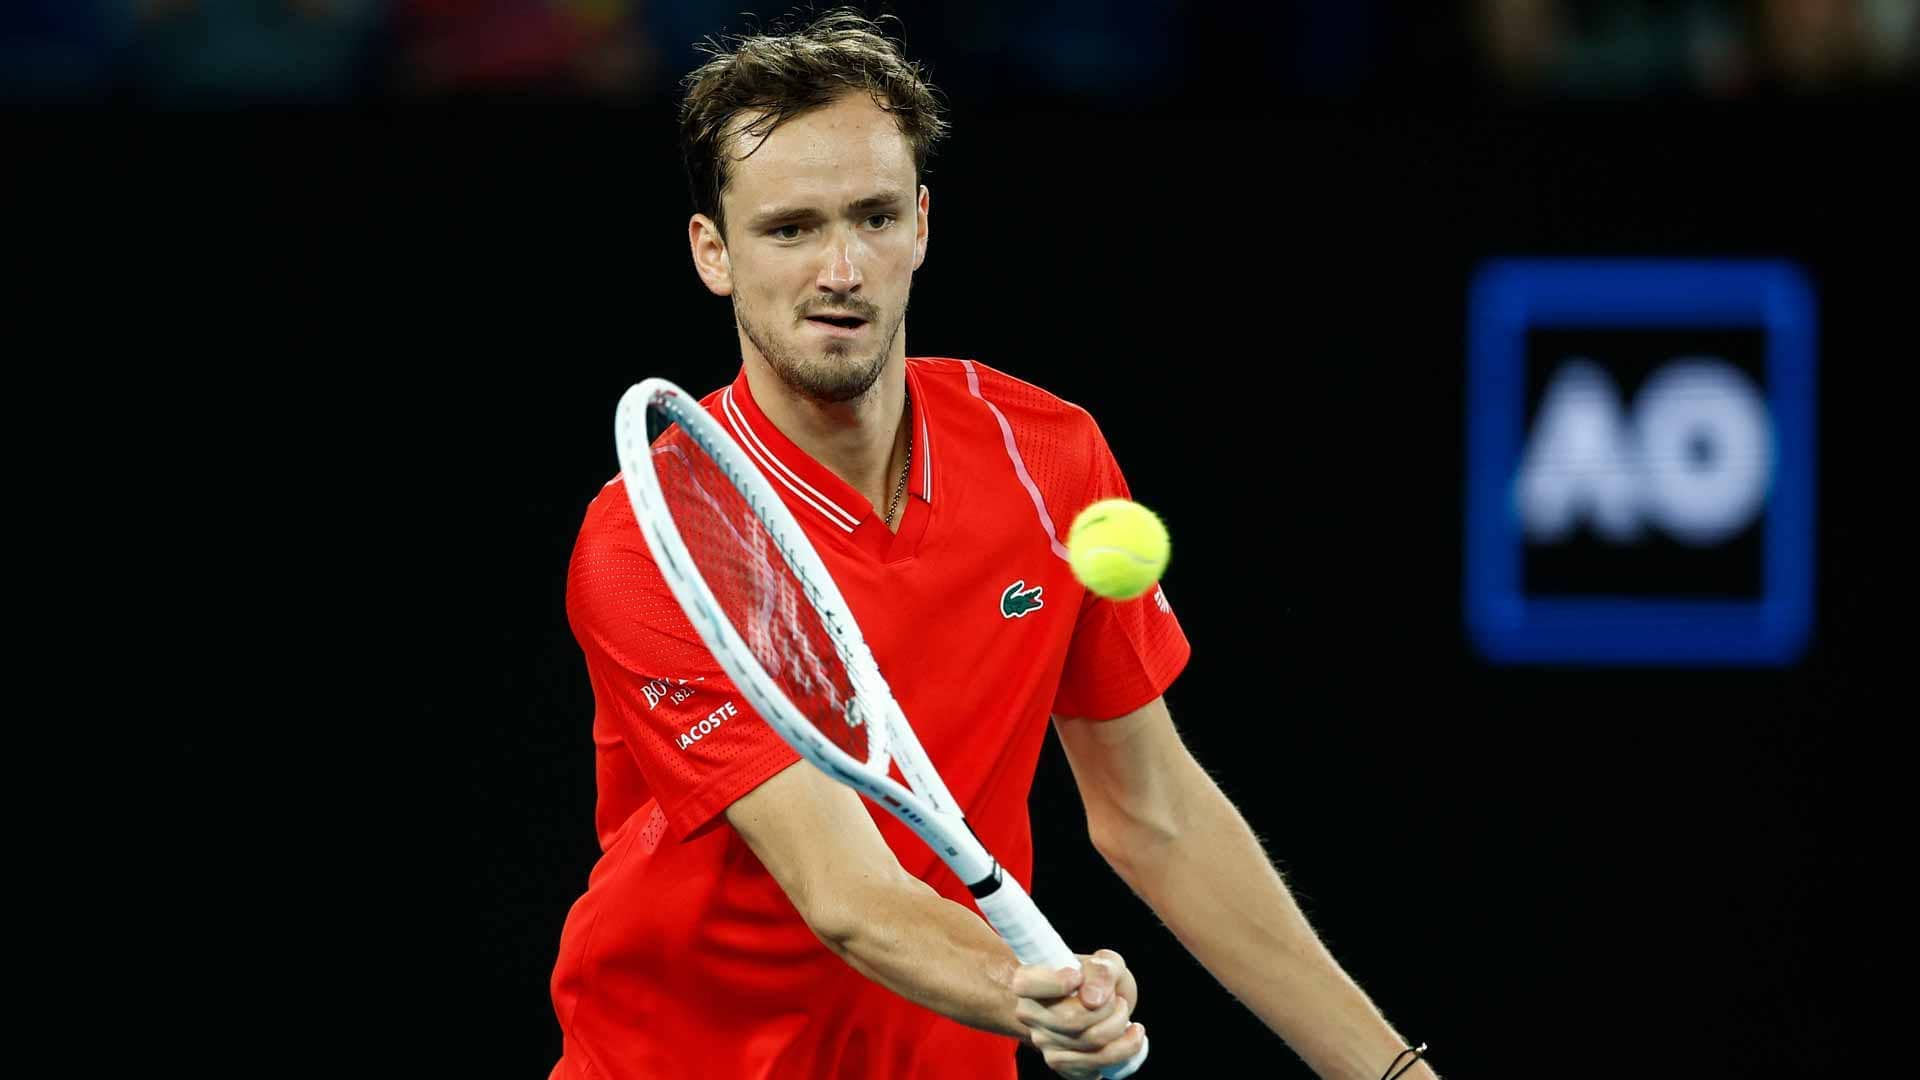 Daniil Medvedev suffers an early exit at the 2023 Australian Open.